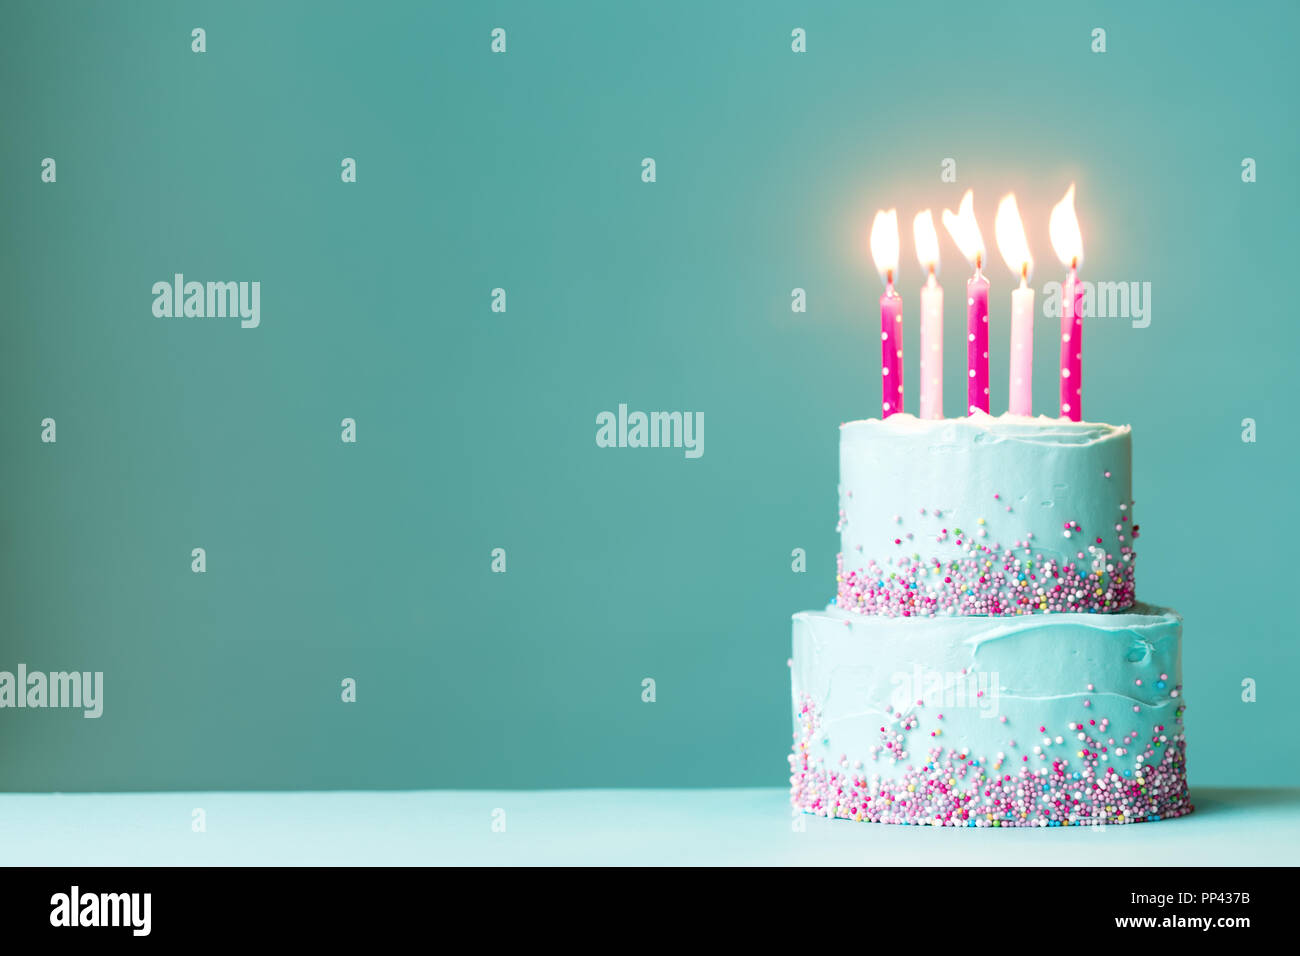 Tiered birthday cake with pink candles and sprinkles Stock Photo - Alamy